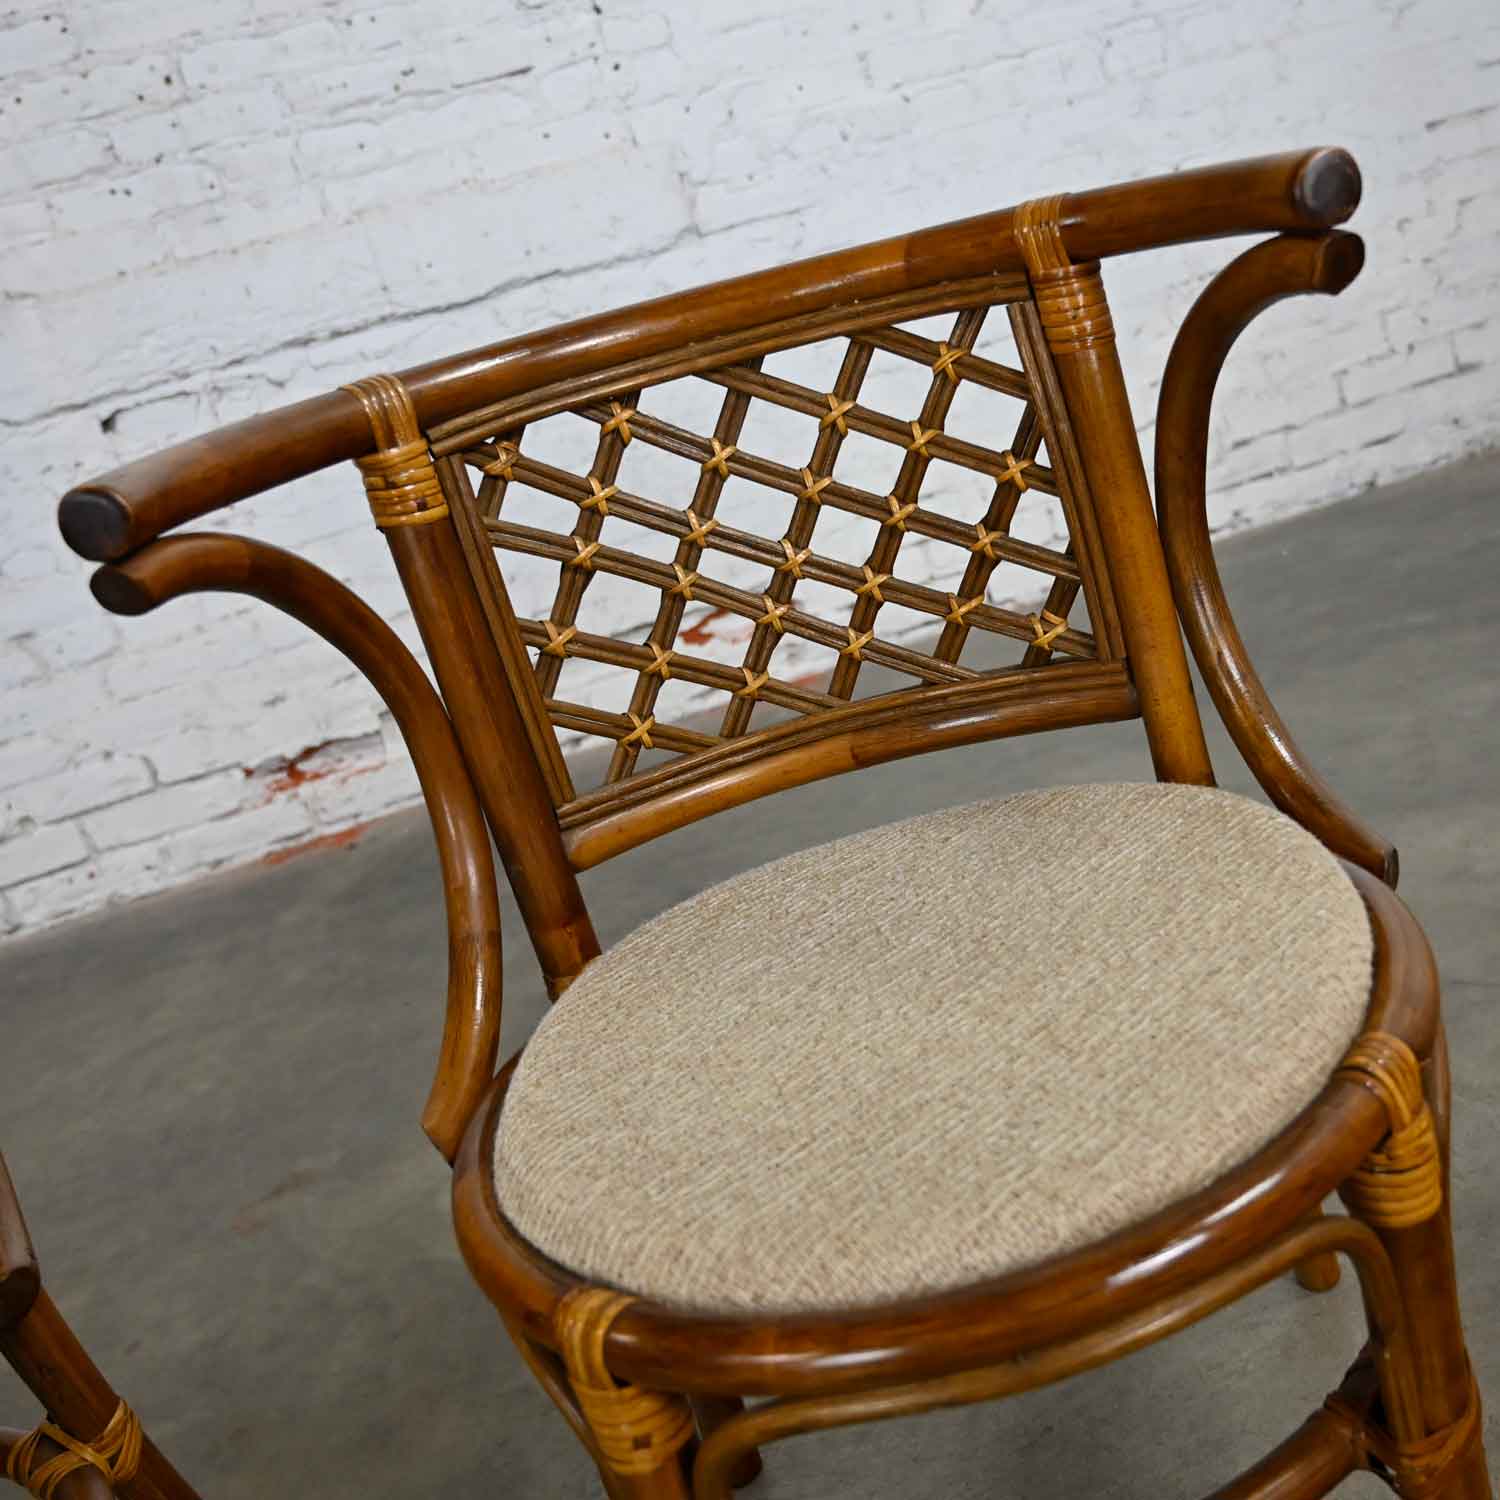 Vintage Rattan & Cane Pair of Side Chairs Woven Diamond Yoke Back Off-White Tweed Fabric